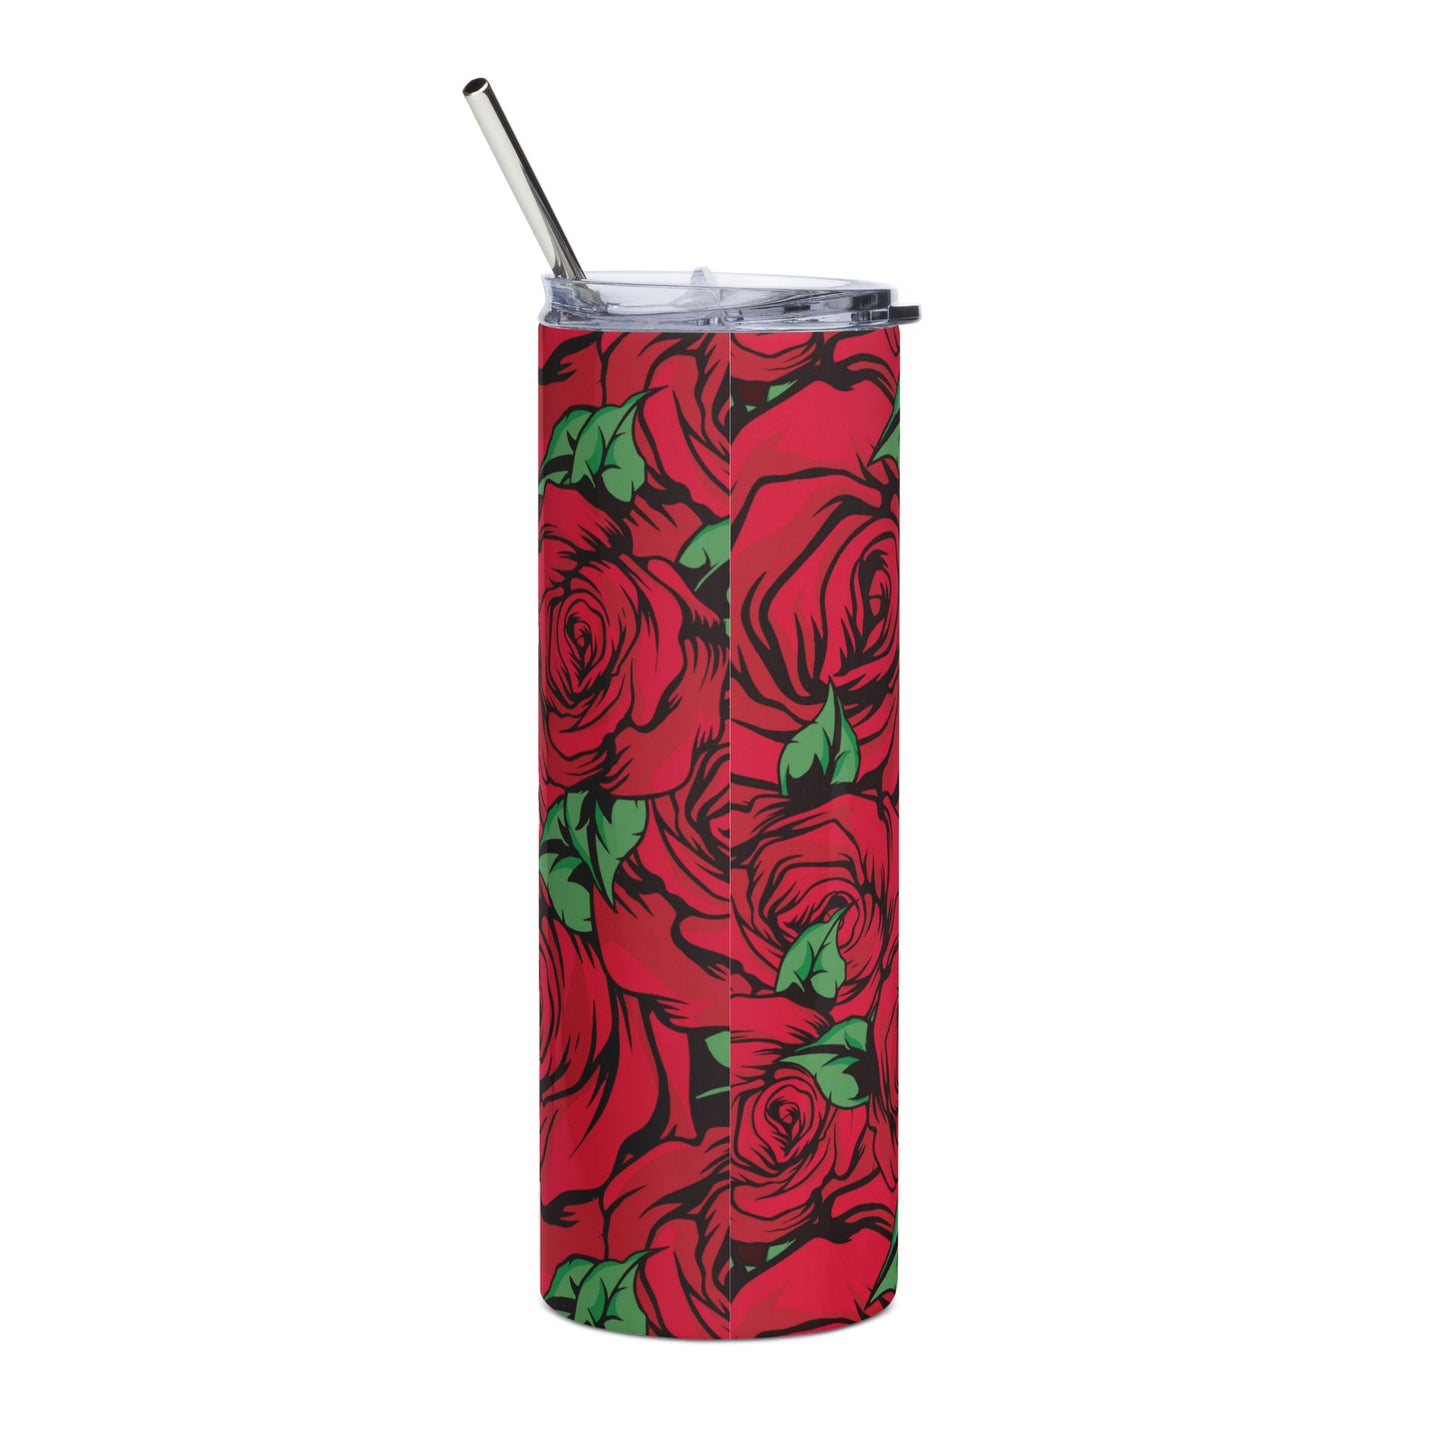 Always Chingona Sometimes Cabrona But Never Pendeja Stainless steel Tumbler